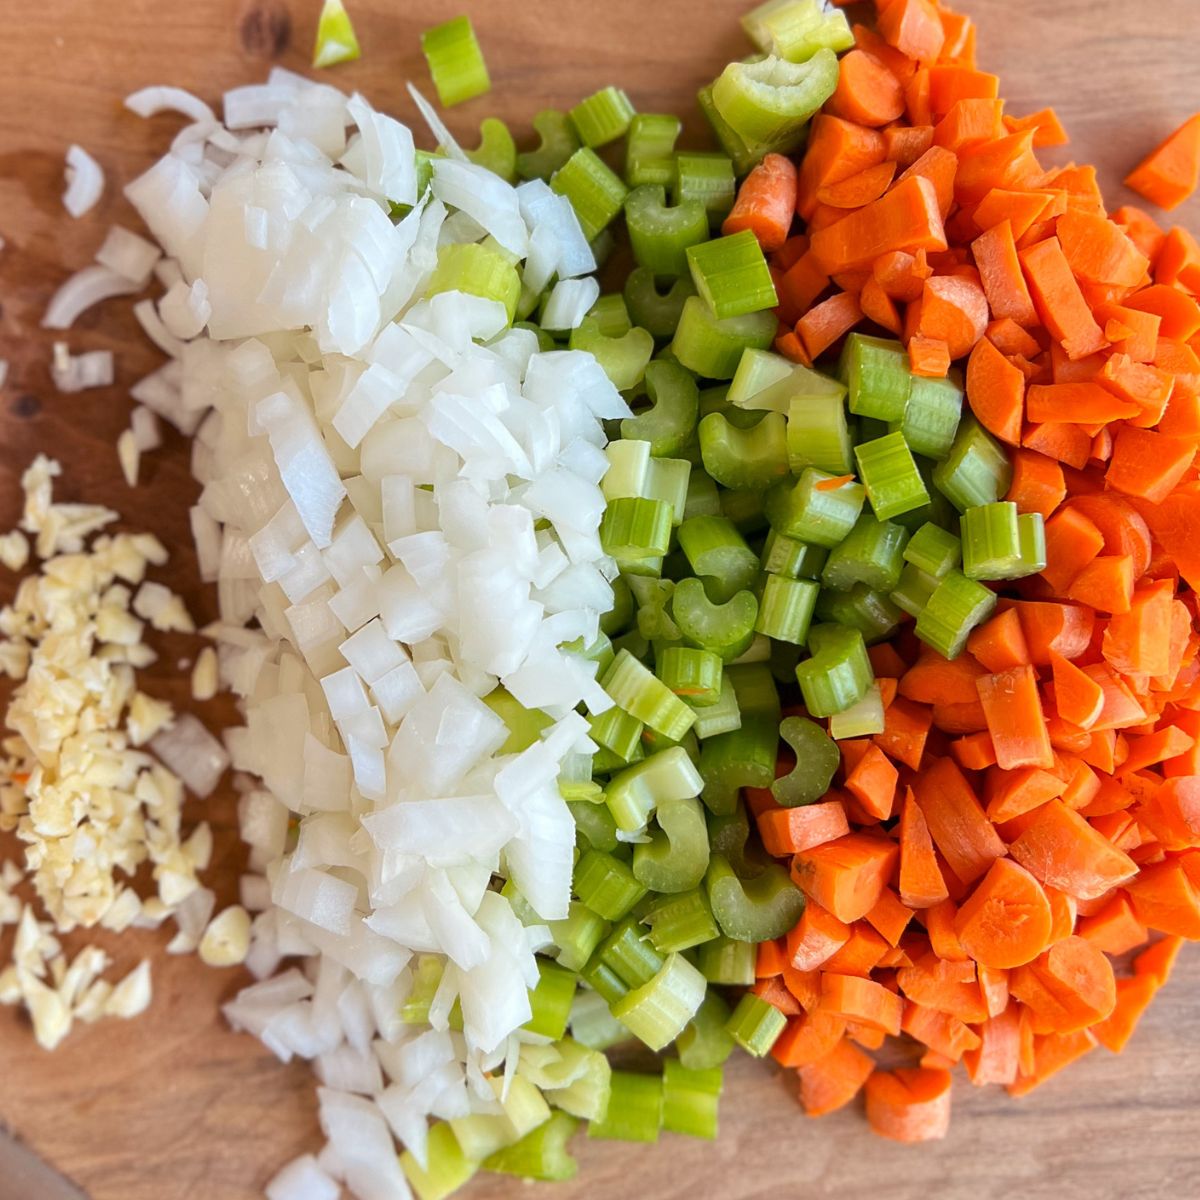 Chopped onion, celery, carrots, and garlic on a wooden cutting board.